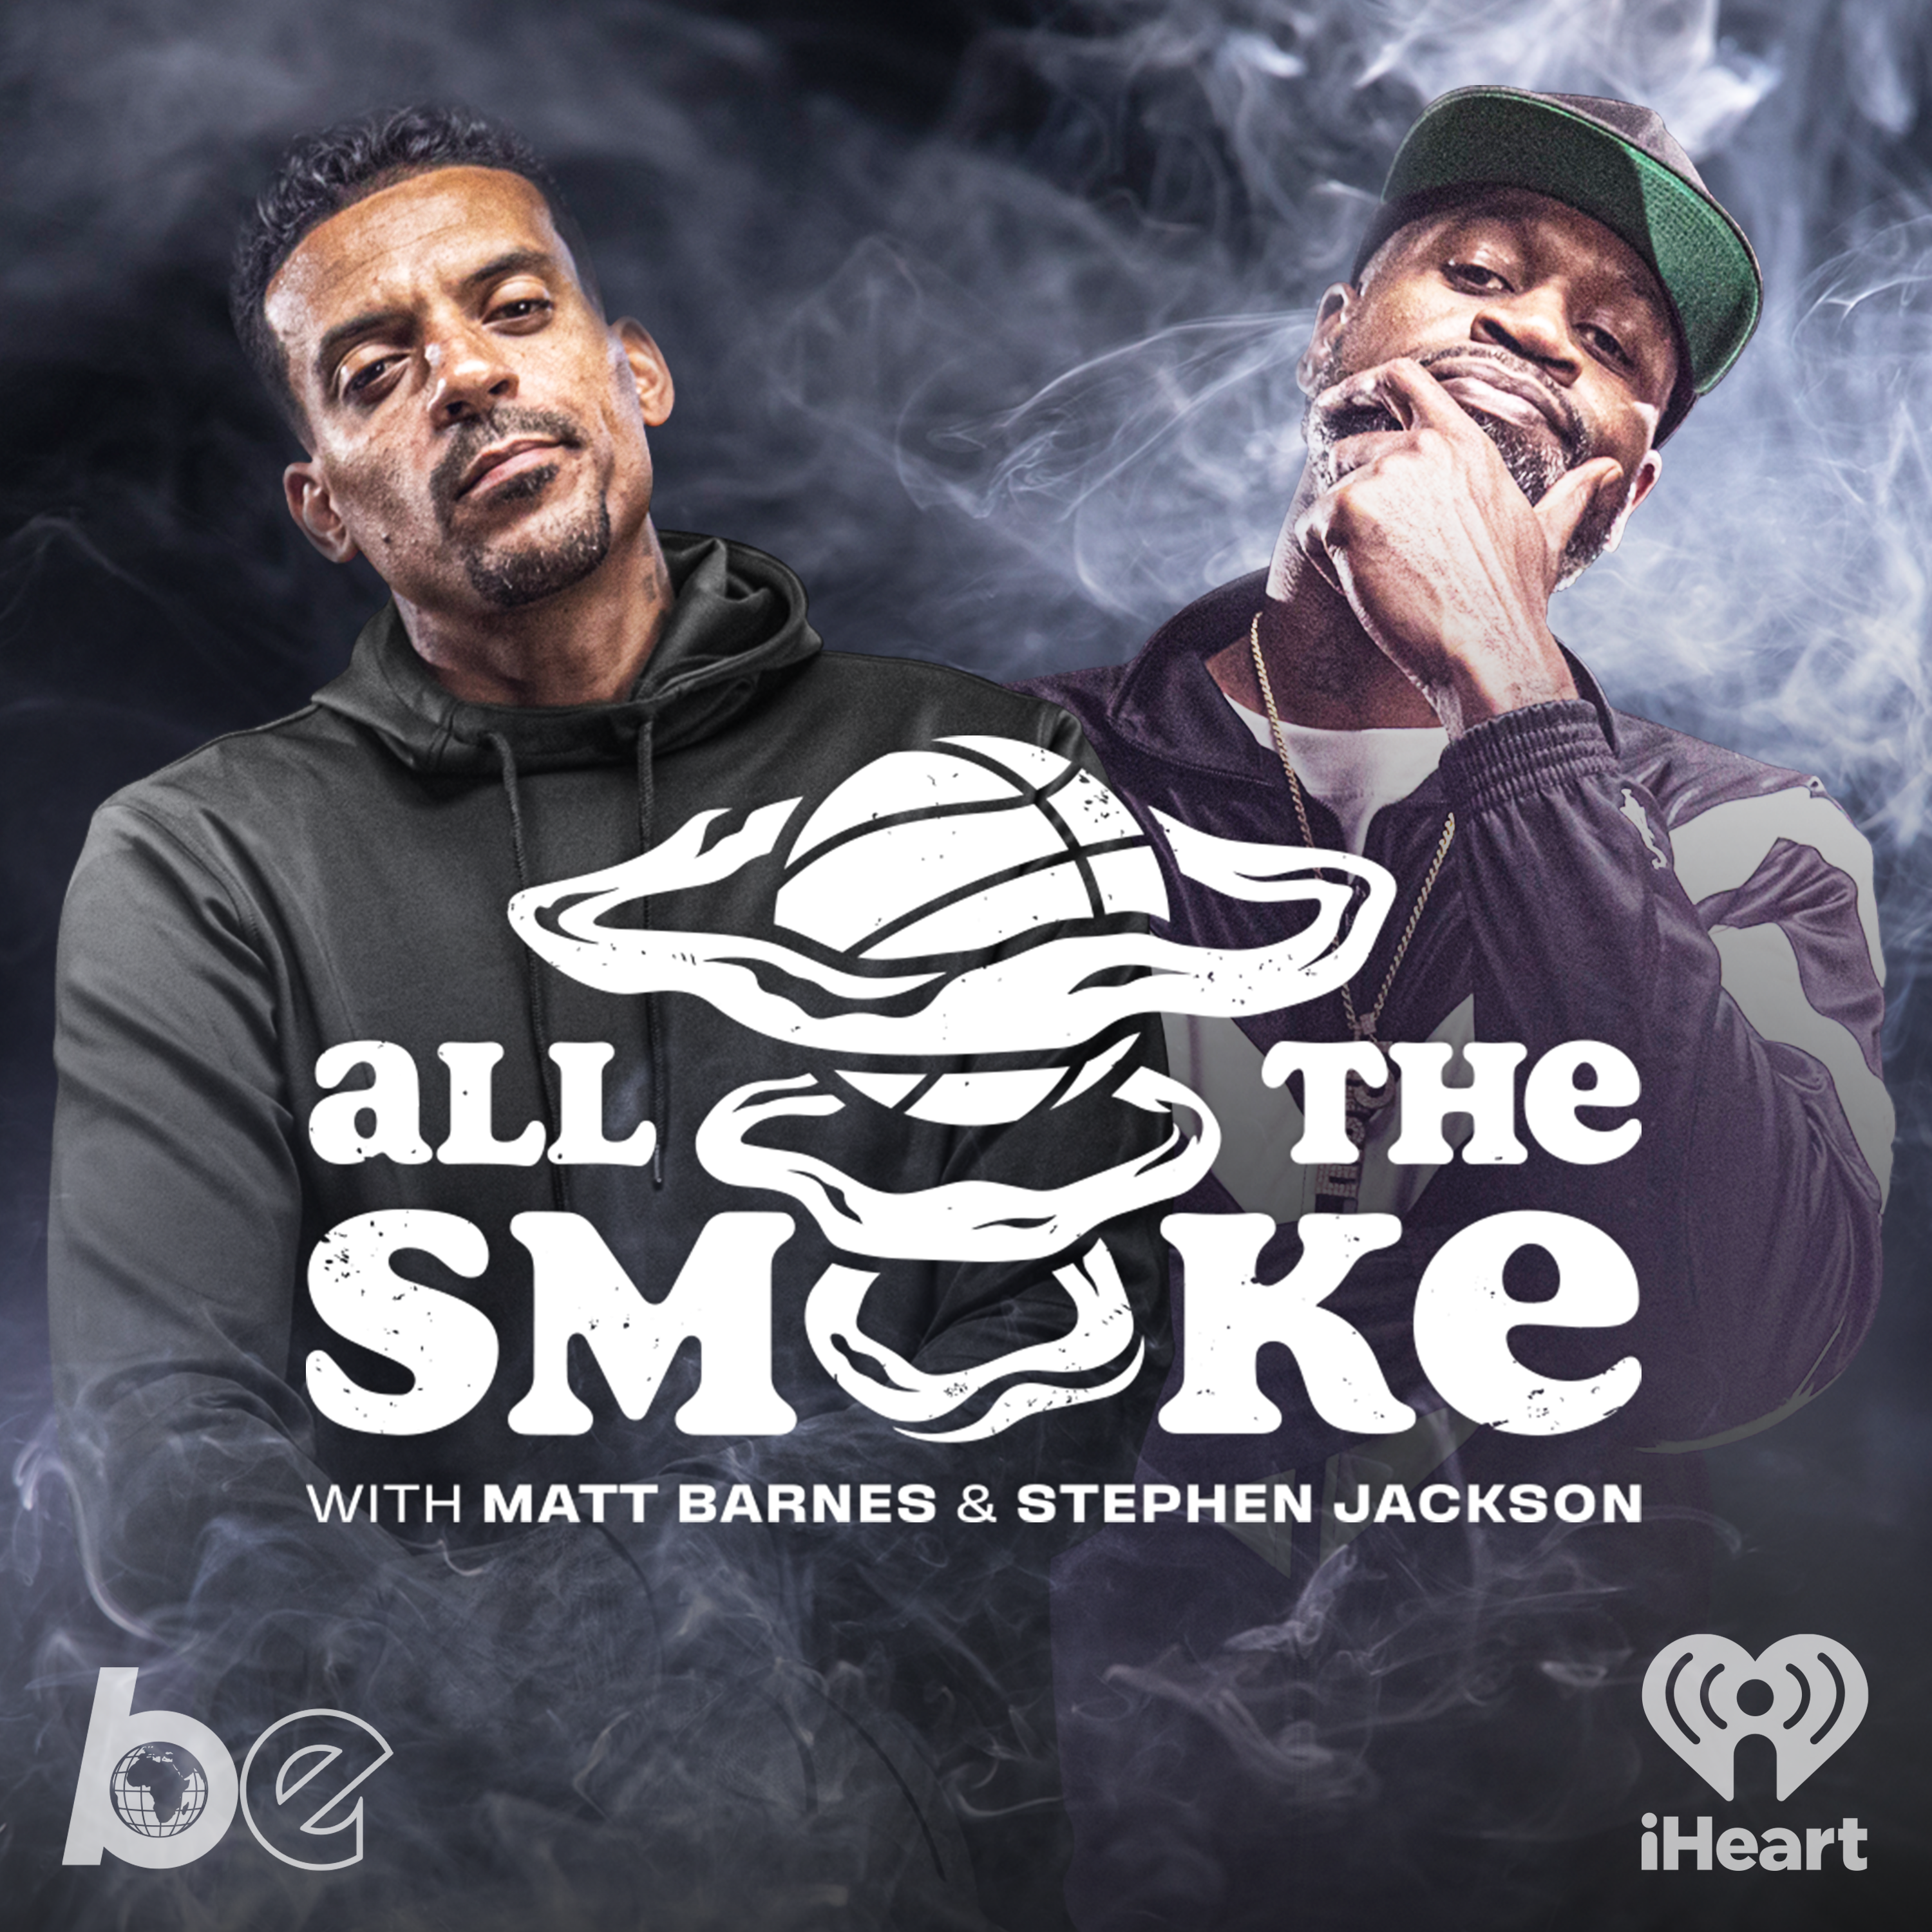 Charles Woodson | Ep 68 | ALL THE SMOKE Full Episode | SHOWTIME Basketball